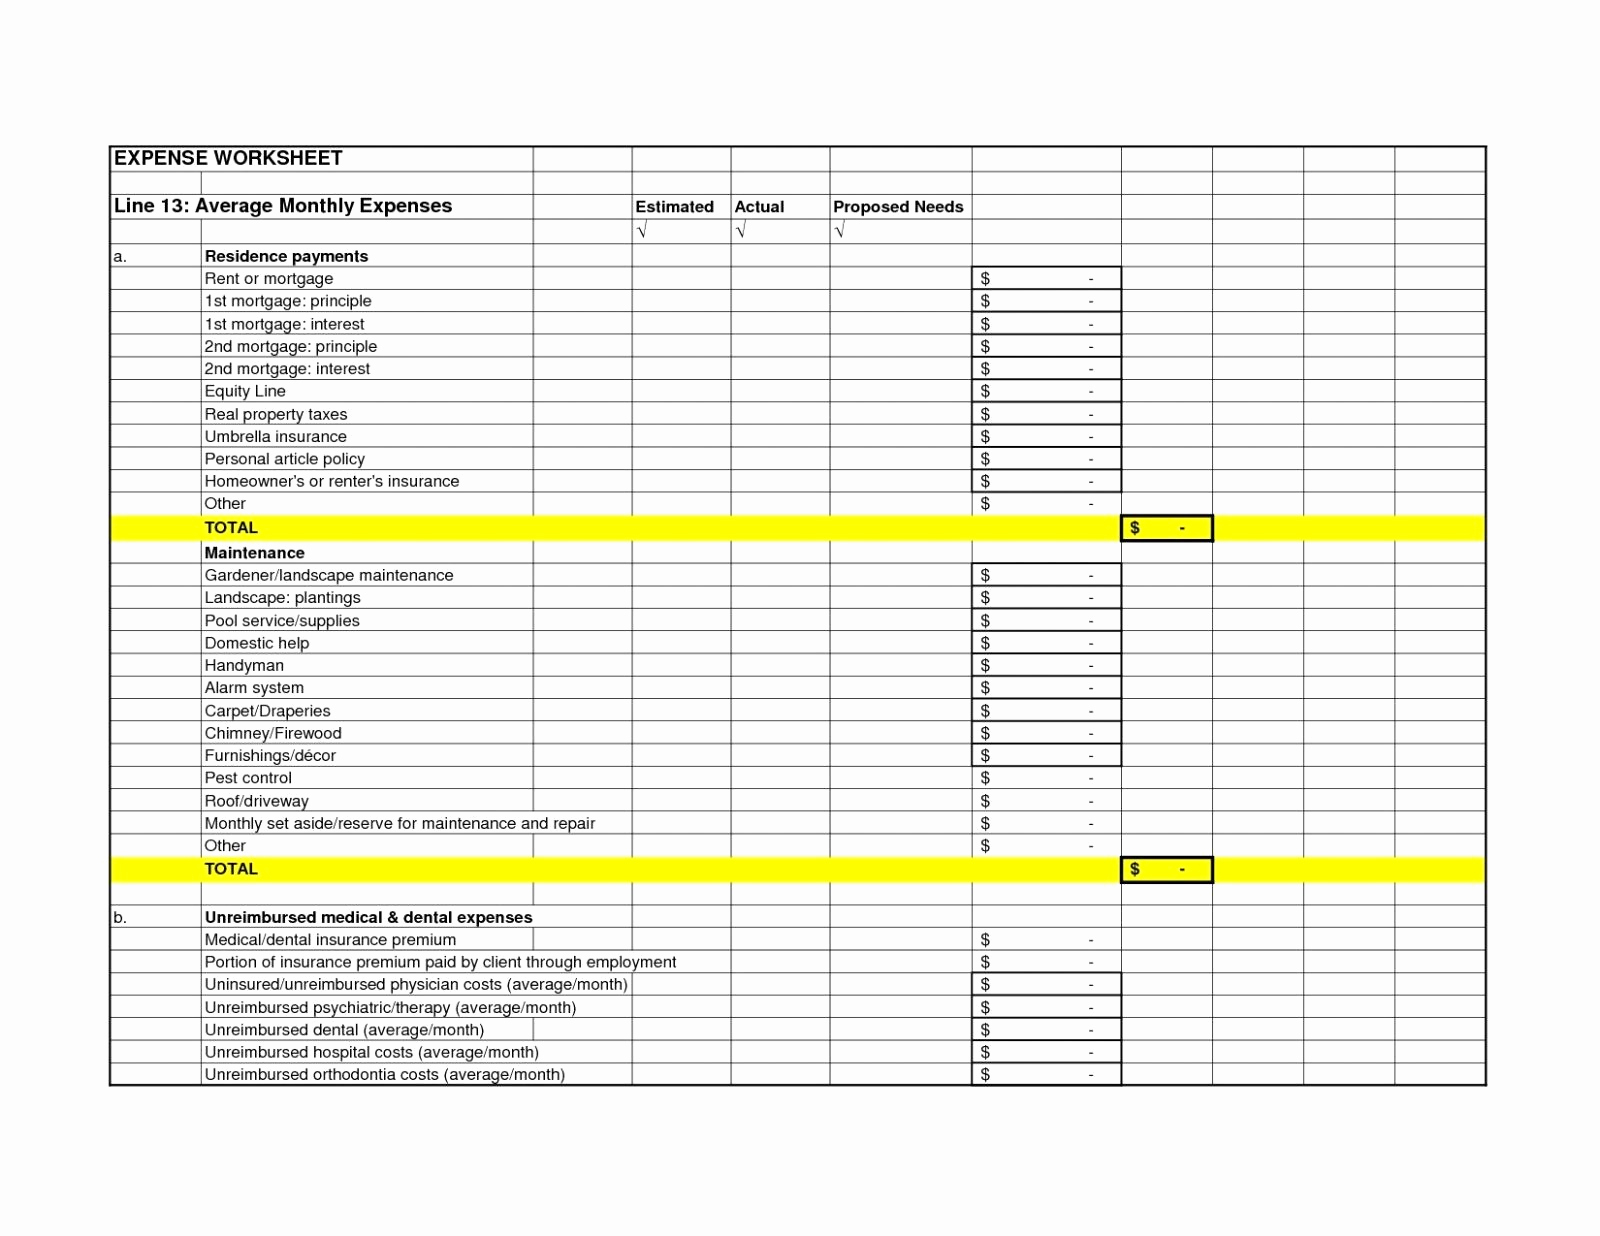 A Homeowner Claim Example Tax Spreadsheet - User Guide Manual That with Business Tax Spreadsheet Templates